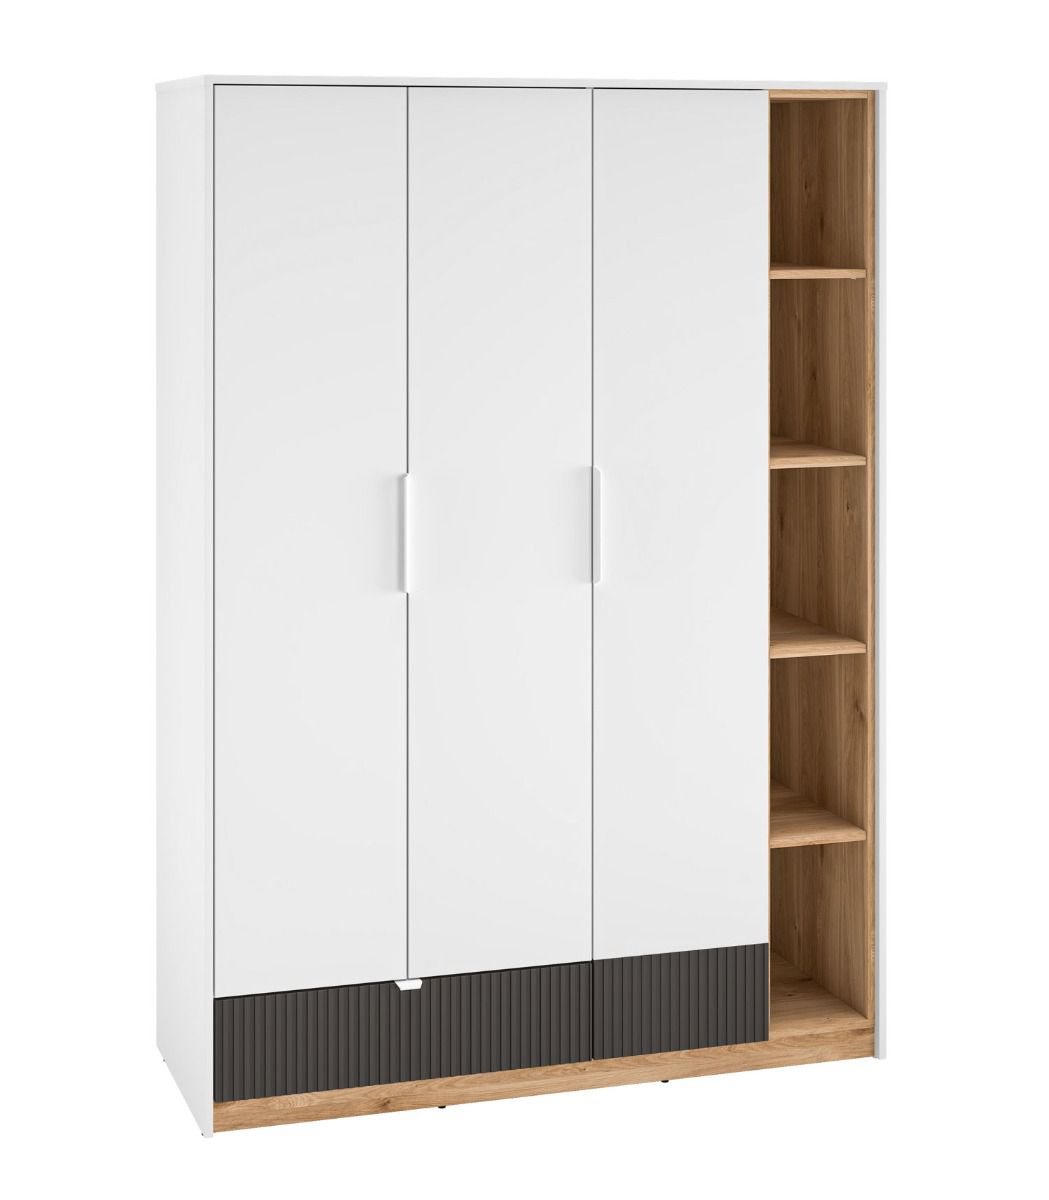 Closet with three doors Mackinac 01, color: white / oak / graphite matt, soft-close system, ABS edge protection, dimensions: 196 x 138 x 53 cm, with one drawer and 11 compartments